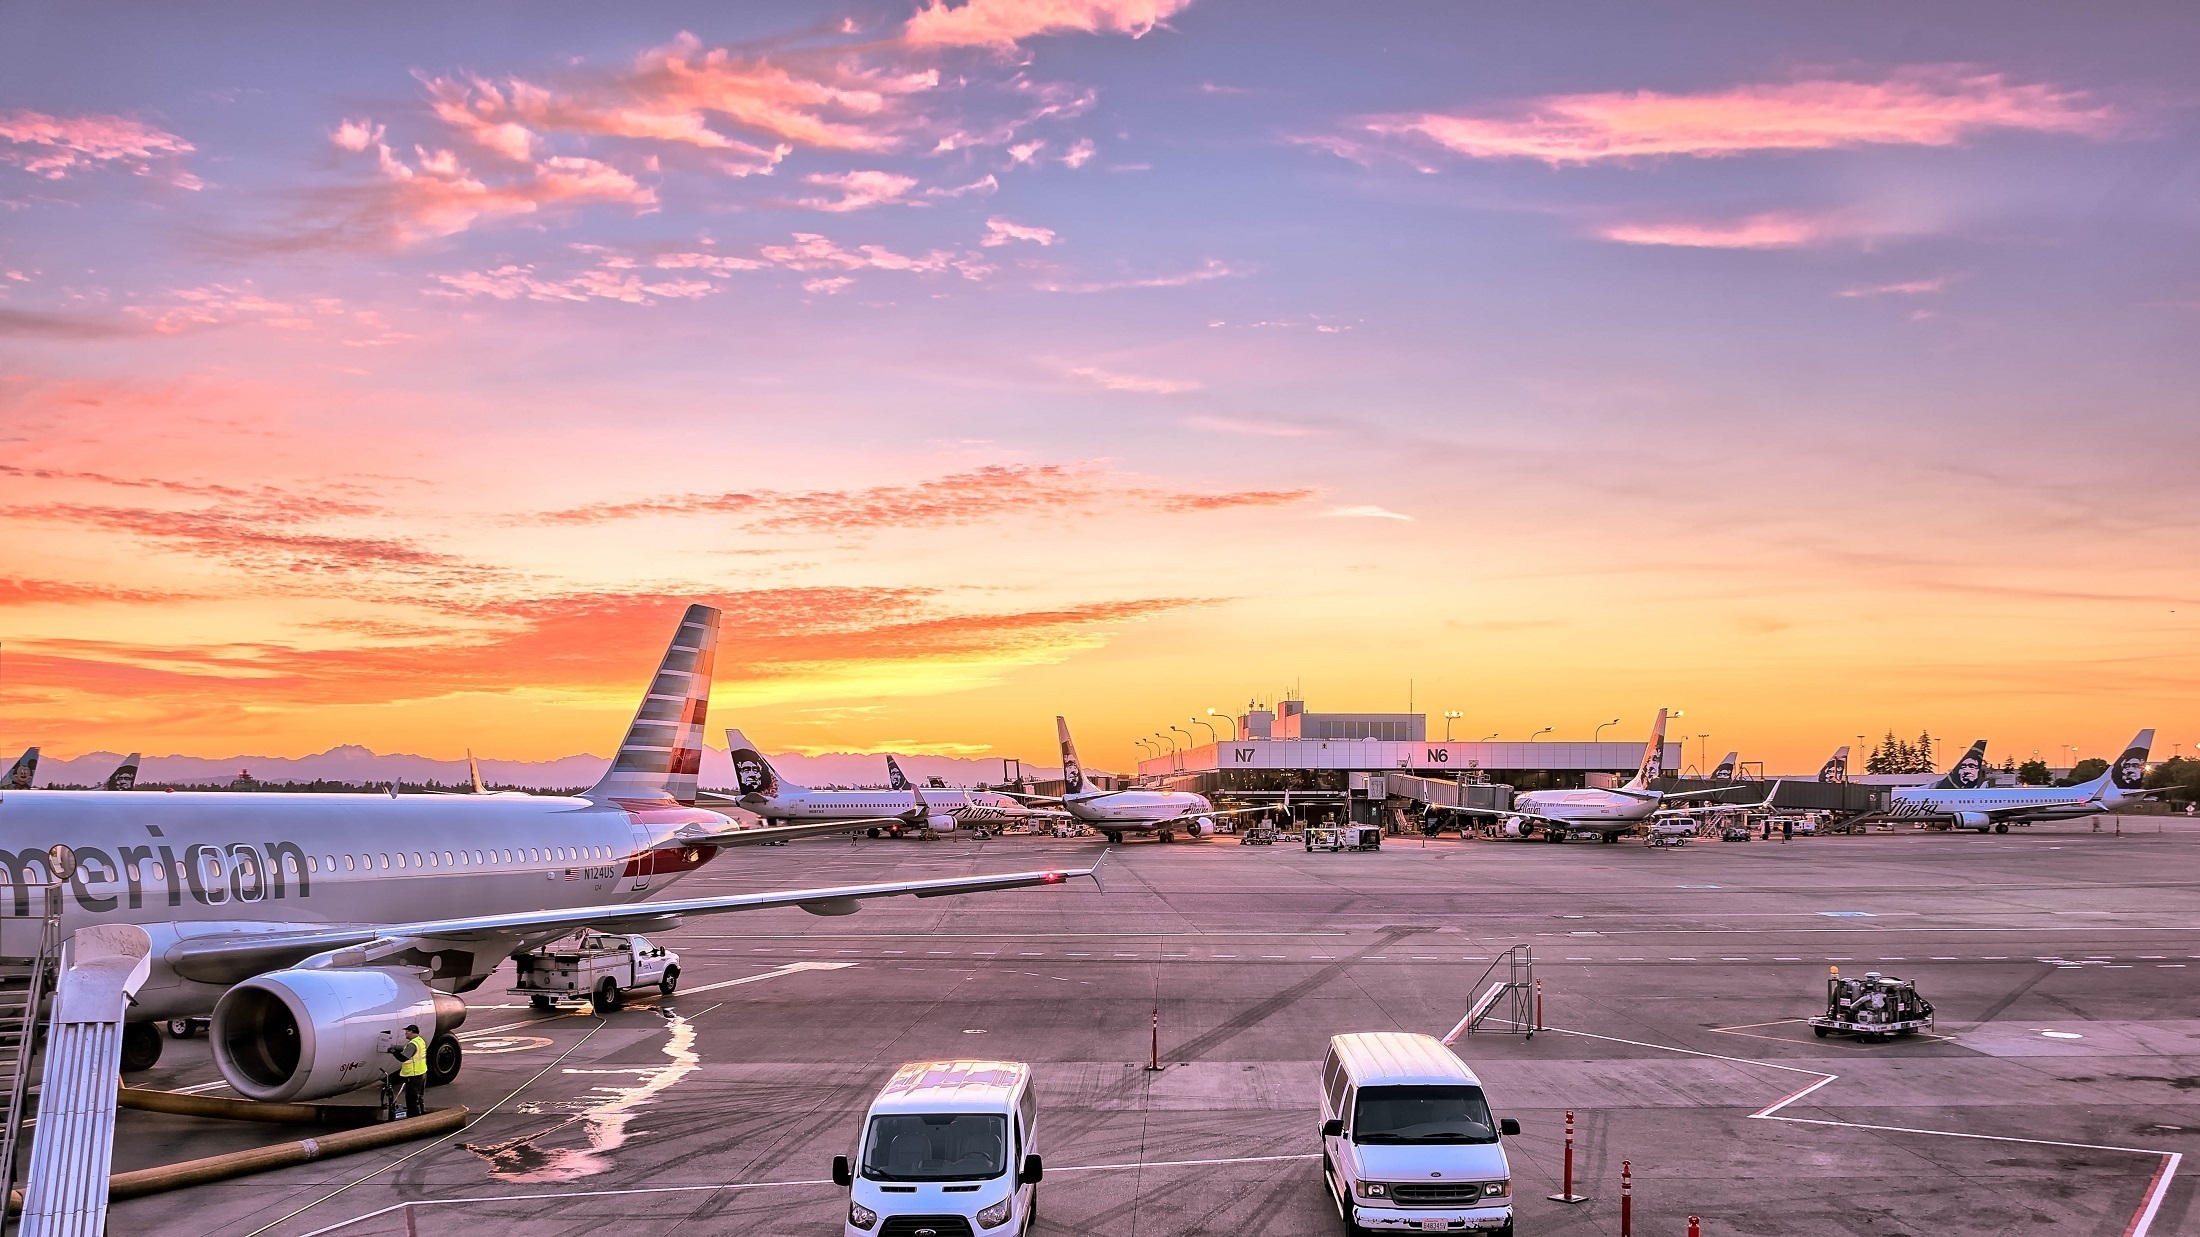 Beautiful airport sunset by skeeze